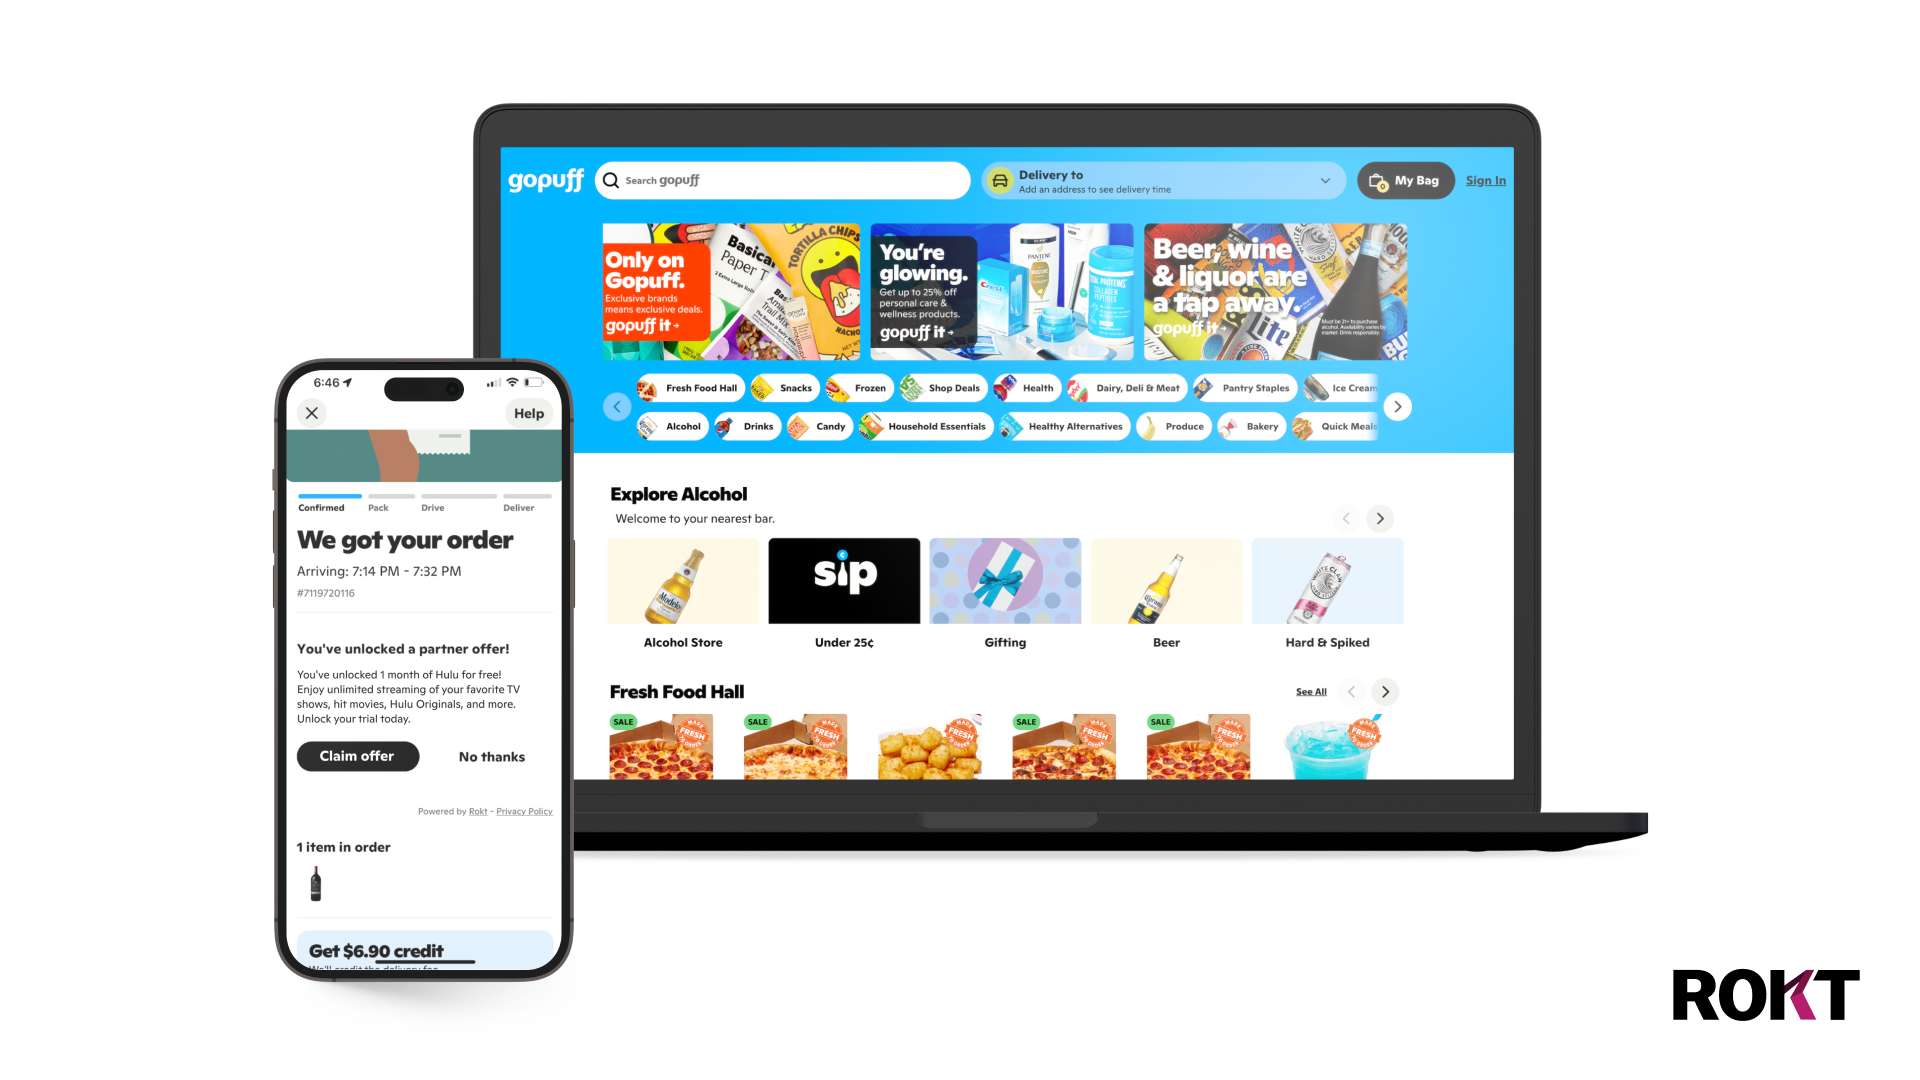 Gopuff partners with Rokt, enabling non-endemic brands to surface relevant offers to Gopuff customers on the order status page.